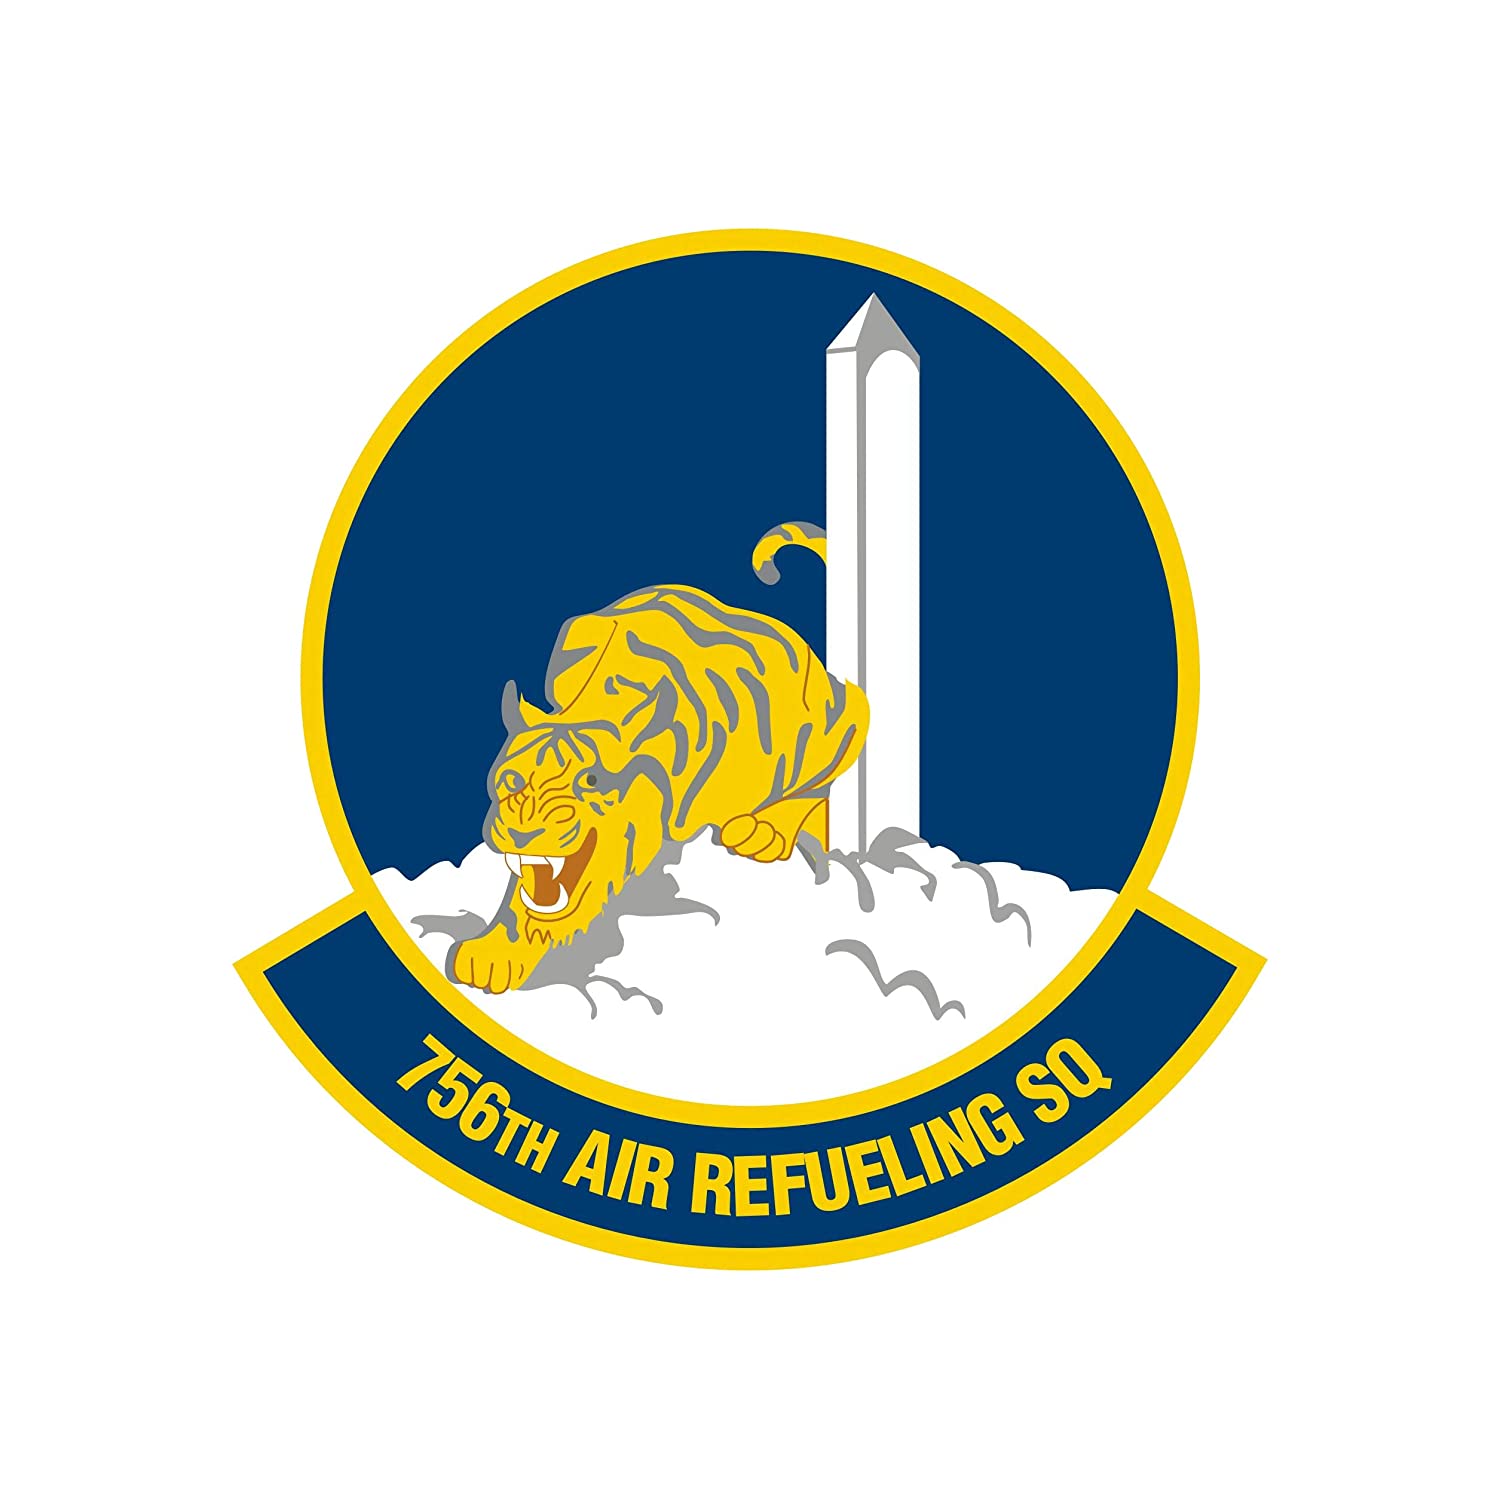 756th Air Refueling Squadron - Patch Vinyl Decal - Available in Multiple Sizes